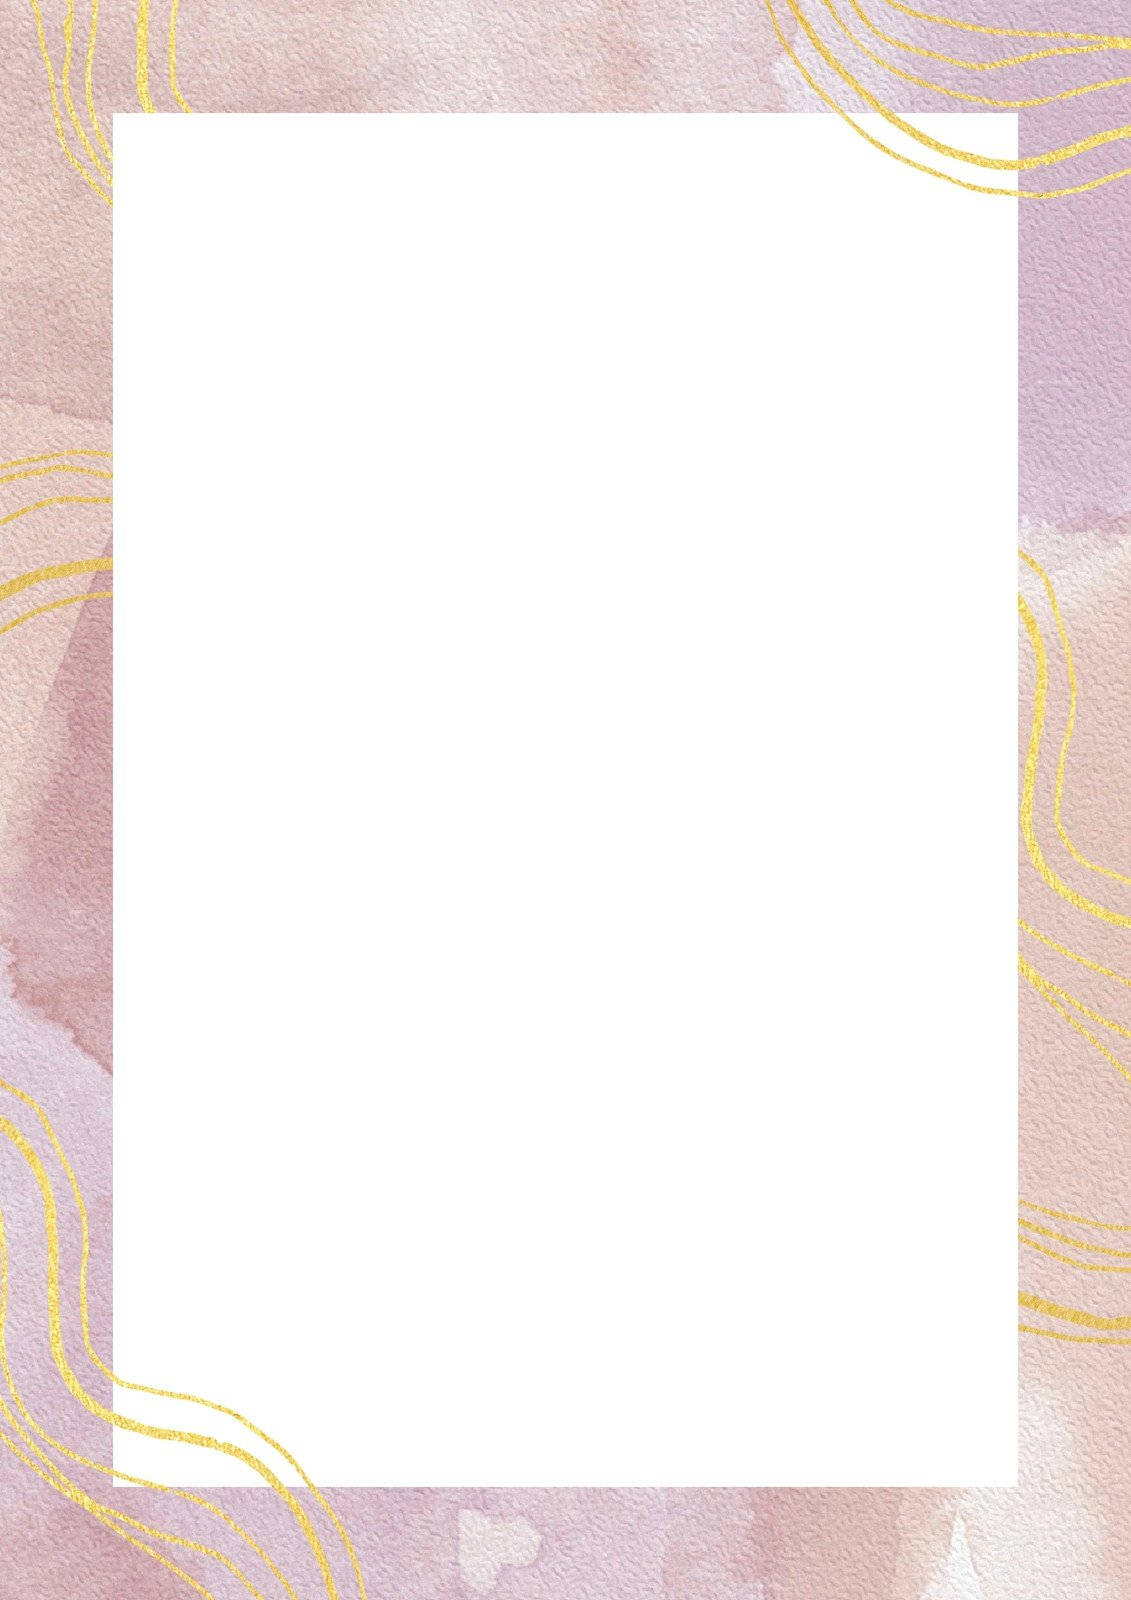 Blank Page Gold&Pink Aesthetic Wallpaper